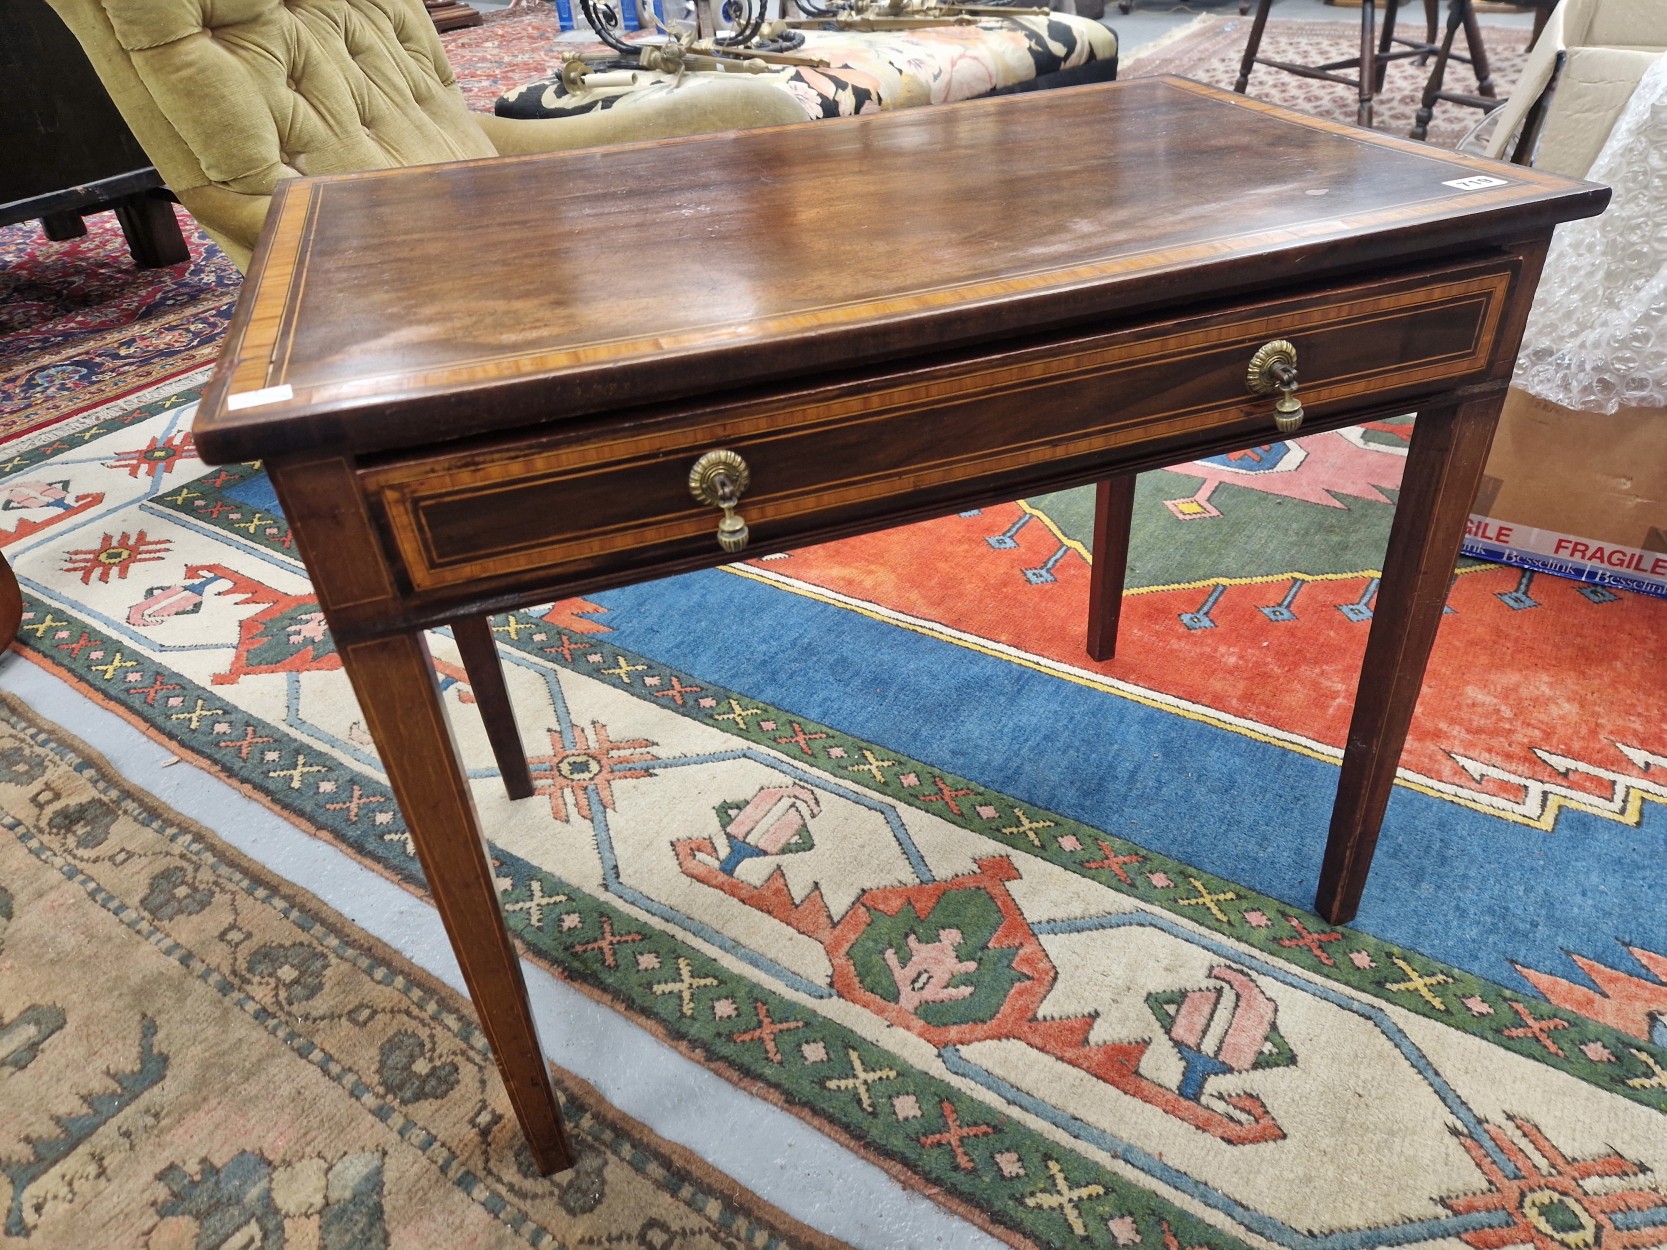 AN ANTIQUE SATIN WOOD BANDED MAHOGANY SIDE TABLE WITH A SINGLE DRAWER ABOVE THE LINE INLAID TAPERING